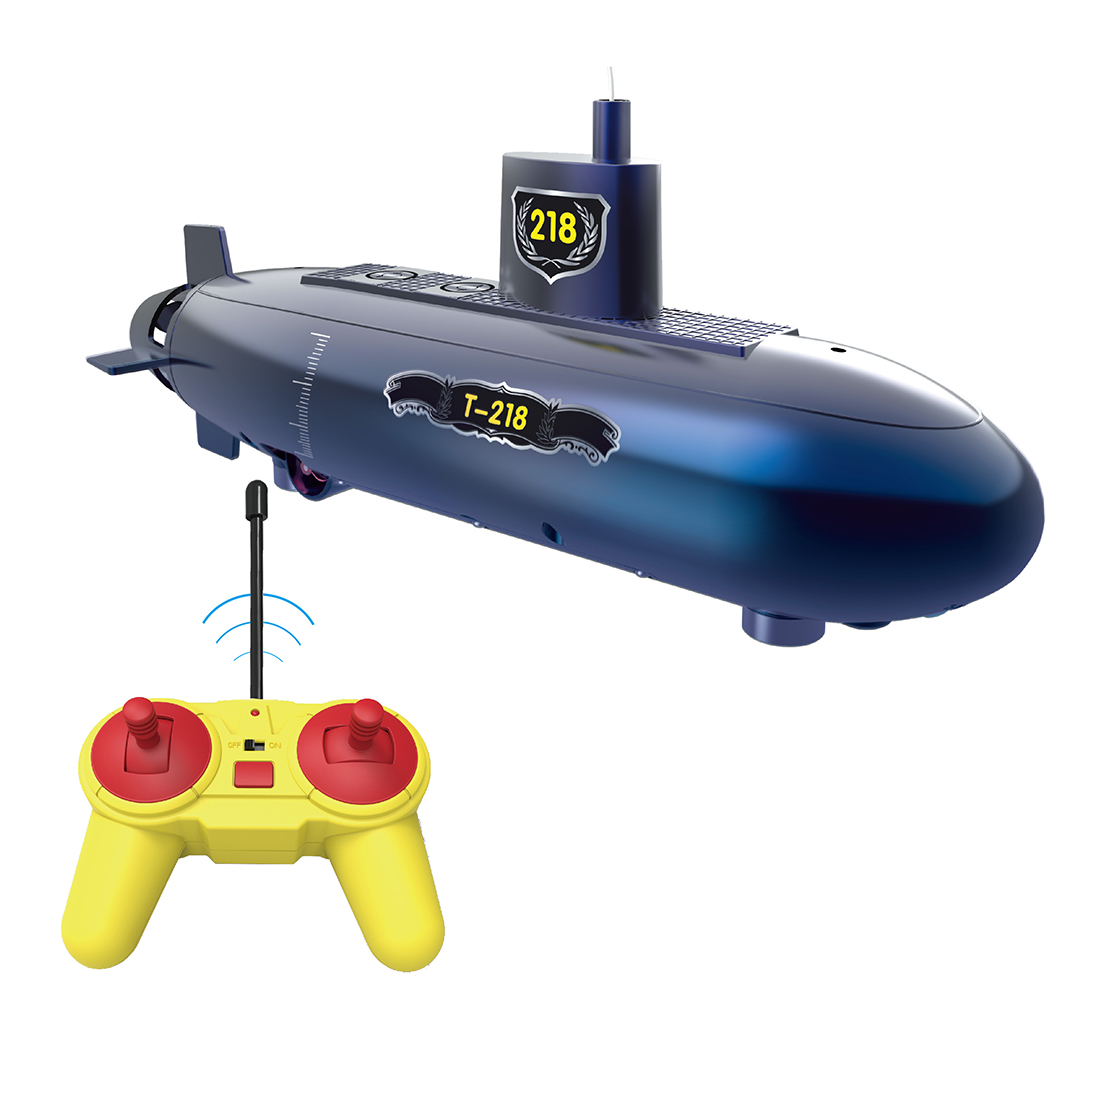 Students DIY 6 Channels RC Mini Submarine toy Remote Control Under Water Ship RC Boat Model Kids Educational Stem children gift